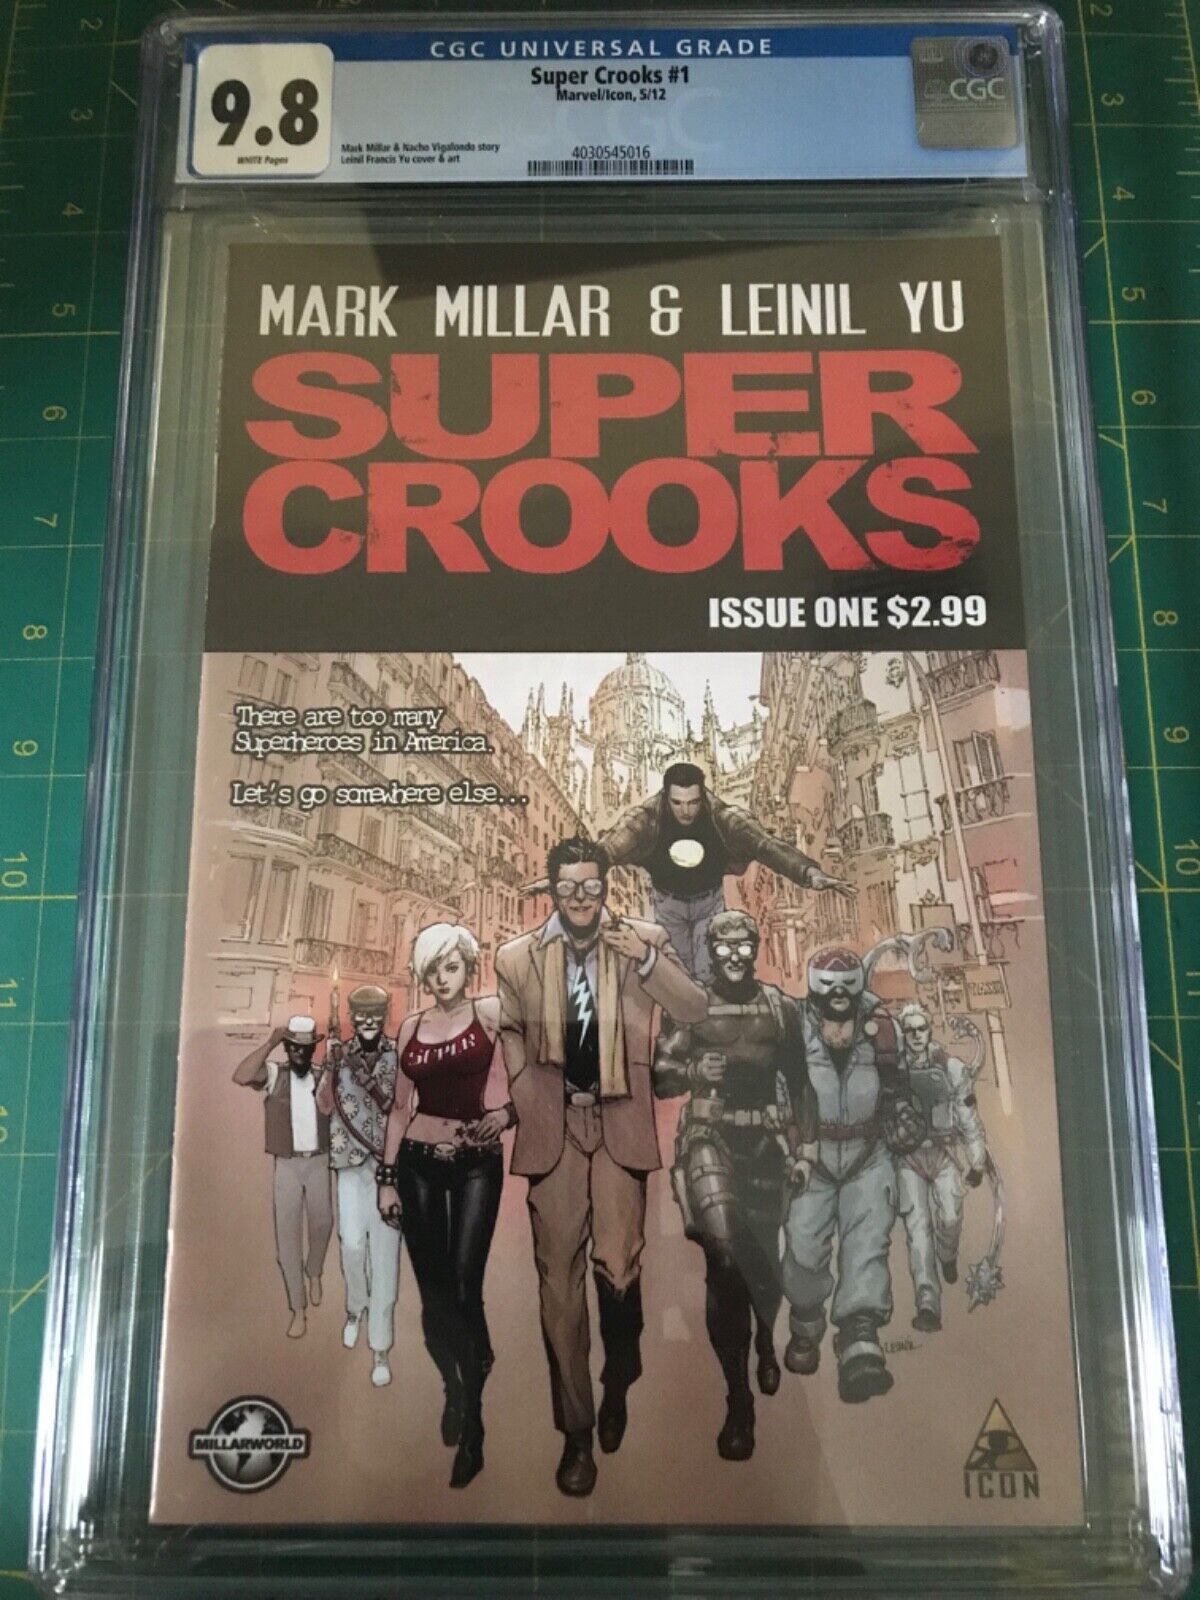 SUPER CROOKS #1 CGC 9.8 WHITE PAGES MILLAR STORY YU COVER AND ART